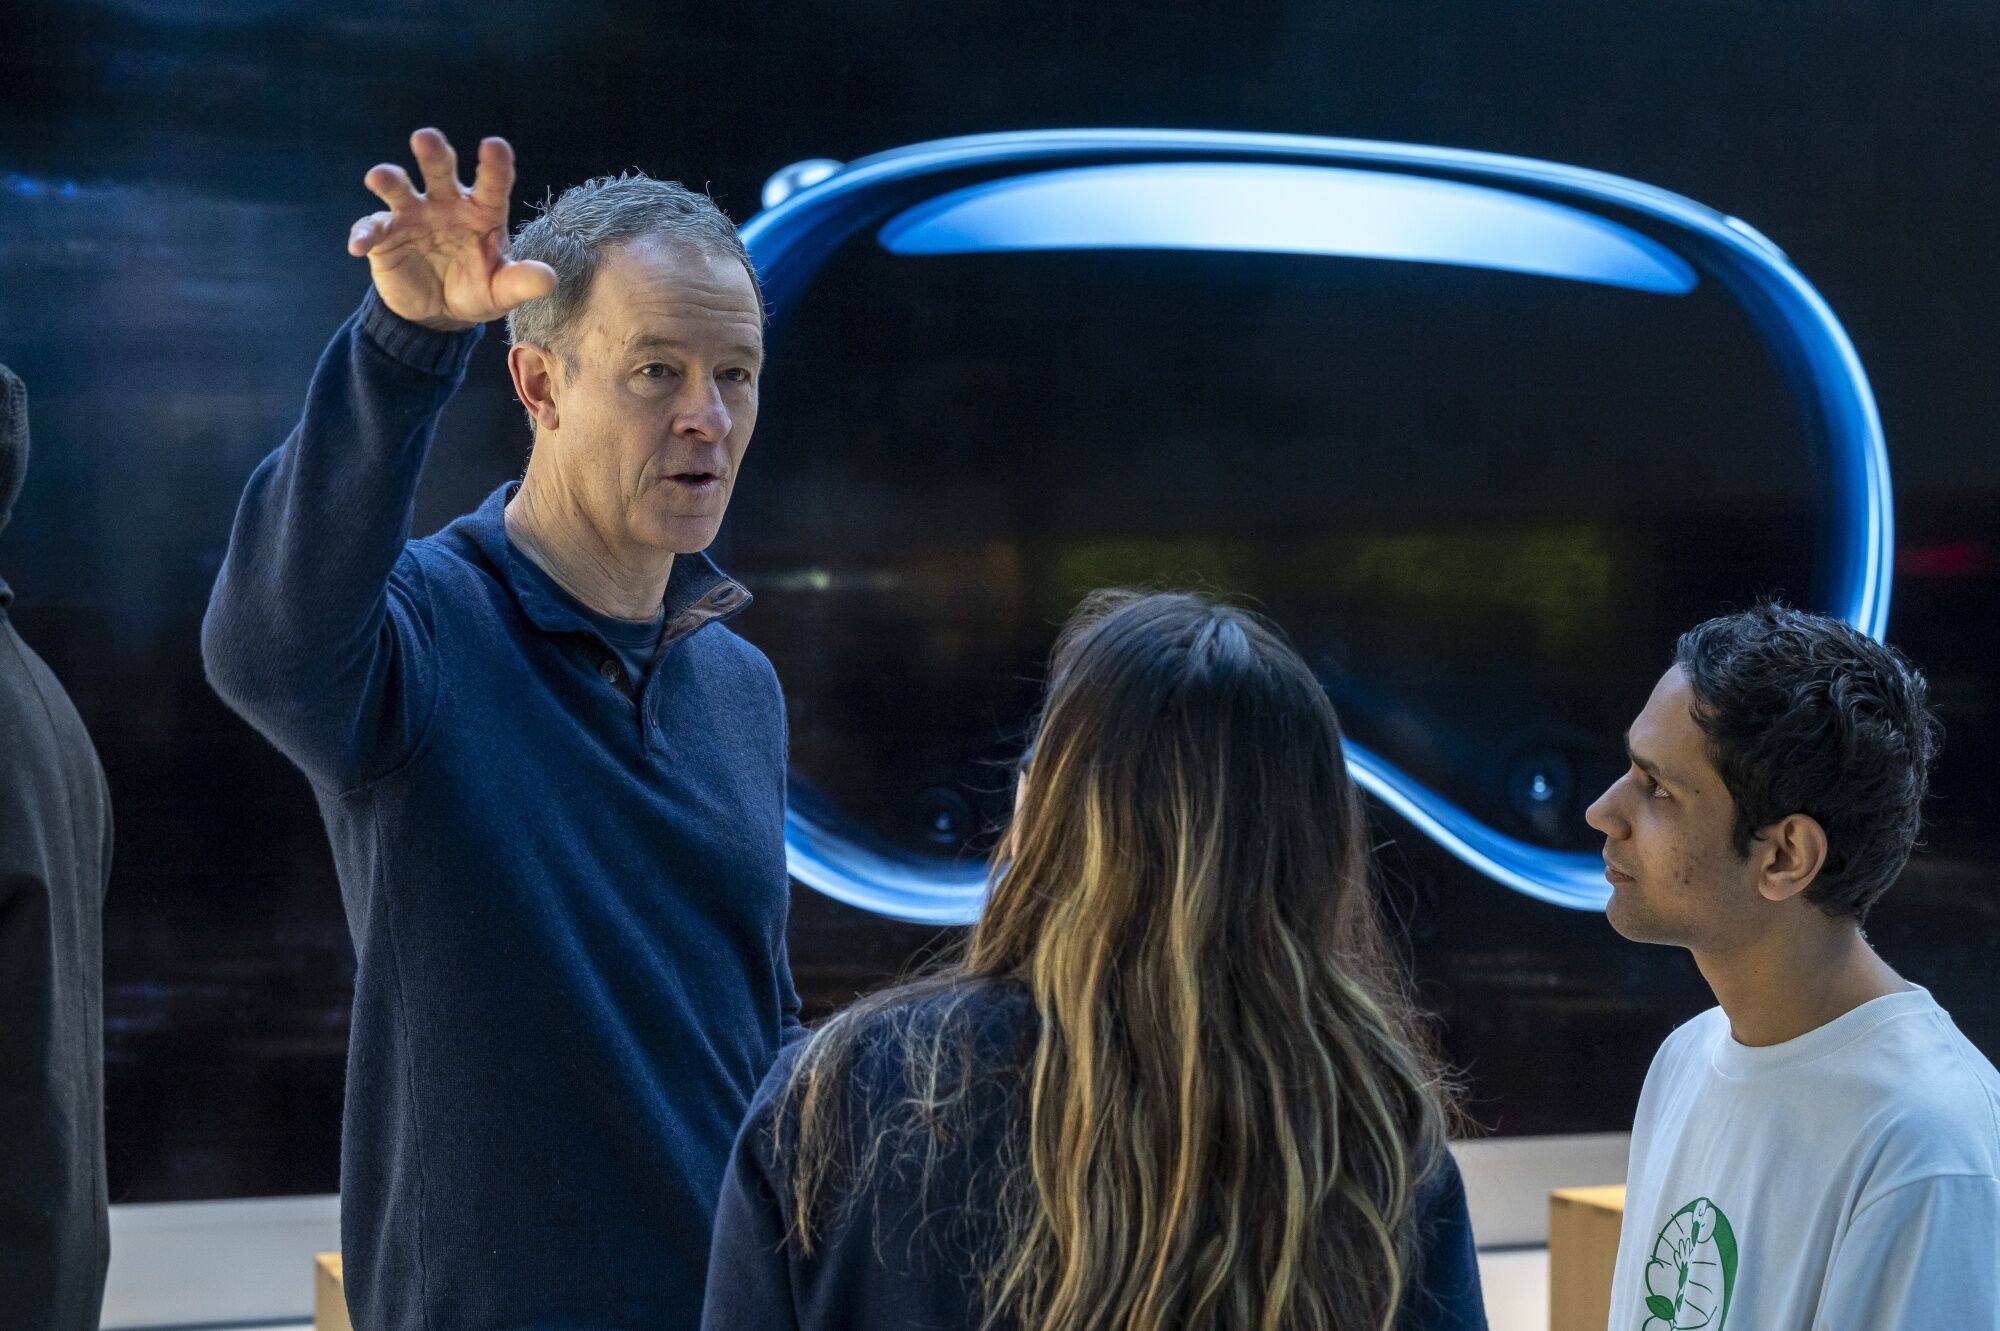 Apple COO Jeff Williams speaks to customers at the company’s store in Palo Alto, California. Photo: Bloomberg